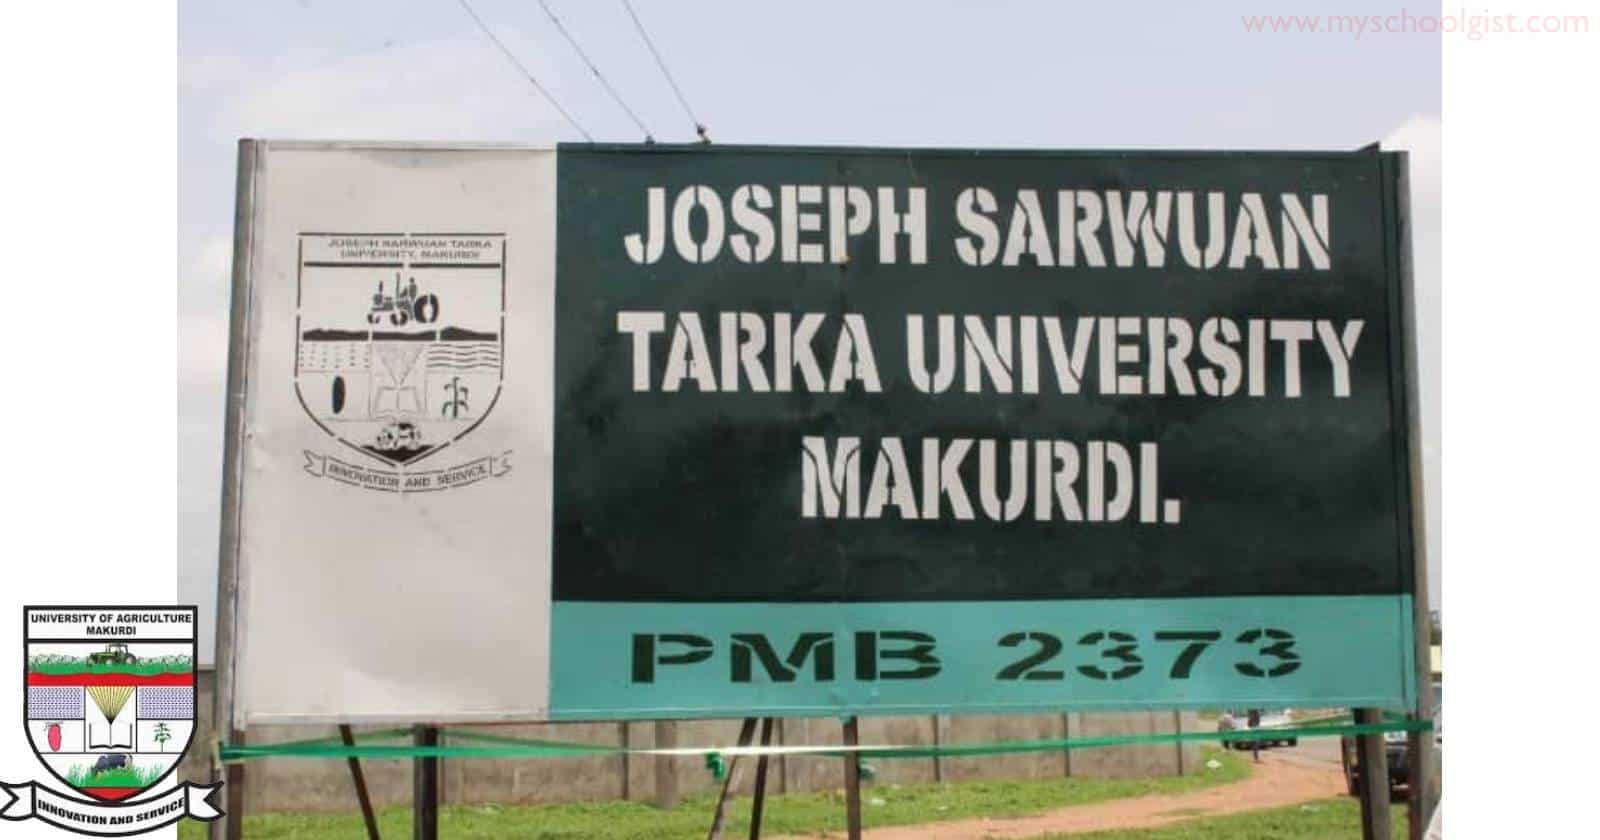 Federal University of Agriculture Makurdi (FUAM) Admission List for 2021/2022 Academic Session